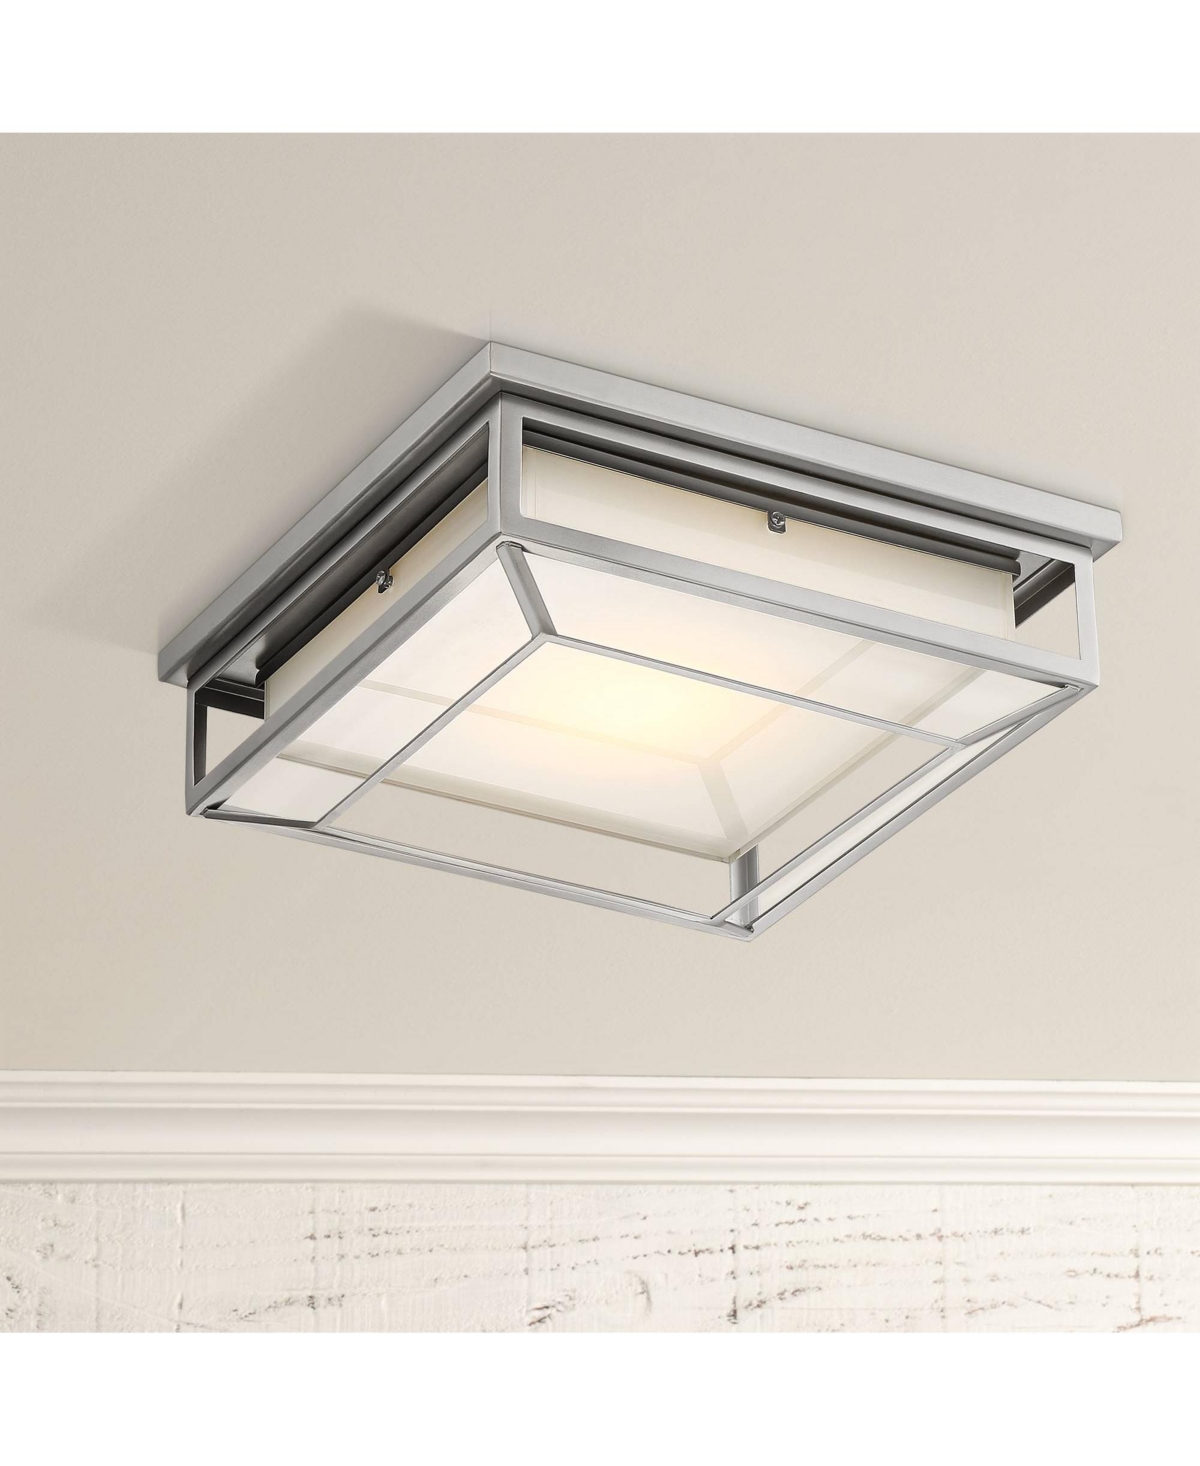 Radcliffe Modern Outdoor Ceiling Light Flush-Mount Fixture Led Matte Nickel 12" Frosted Bonded Glass Damp Rated Exterior House Porch Patio Outside Dec